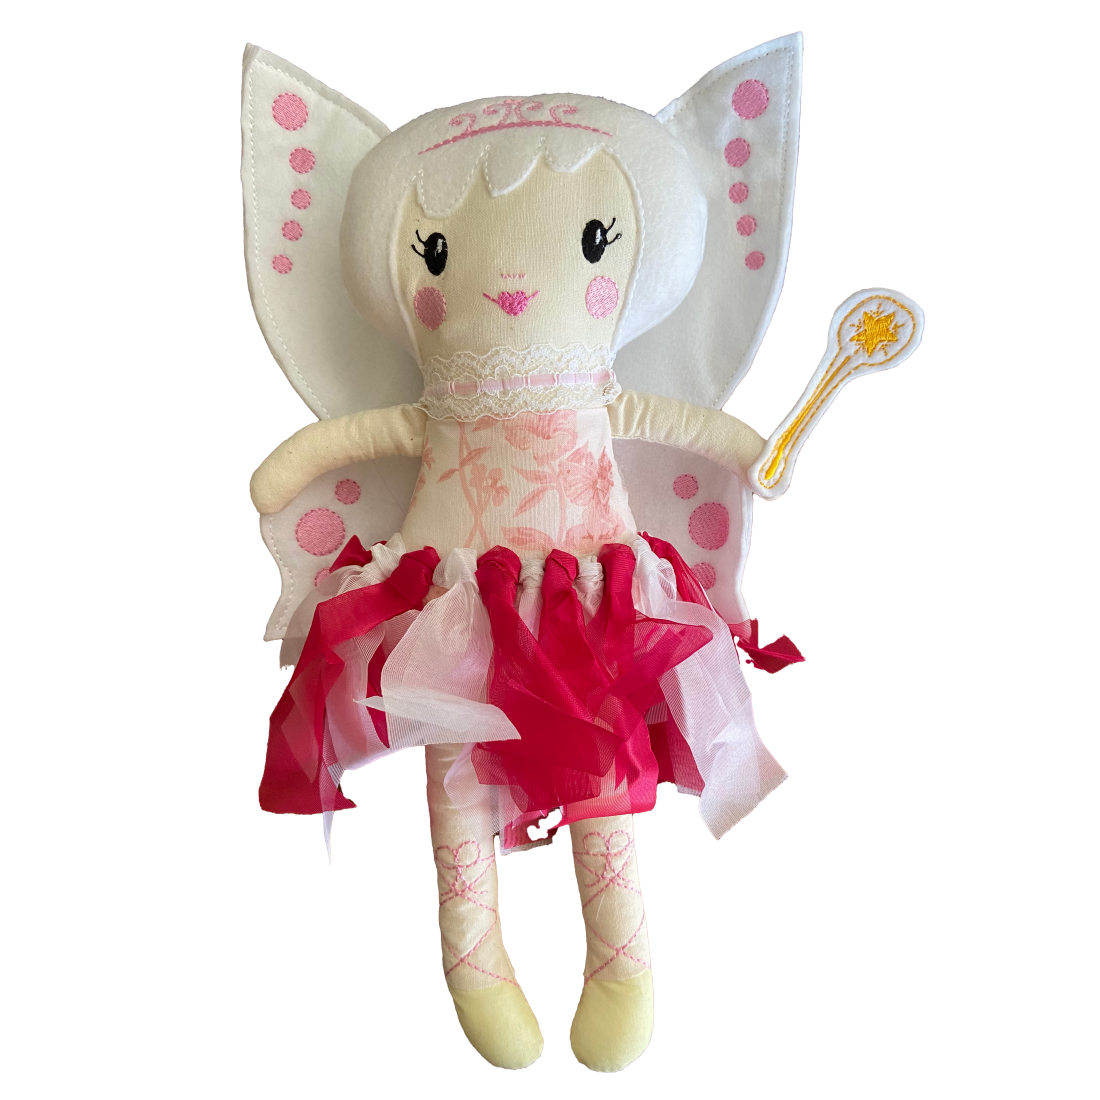 Tooth Fairy Handmade Soft Doll with Floral Detail